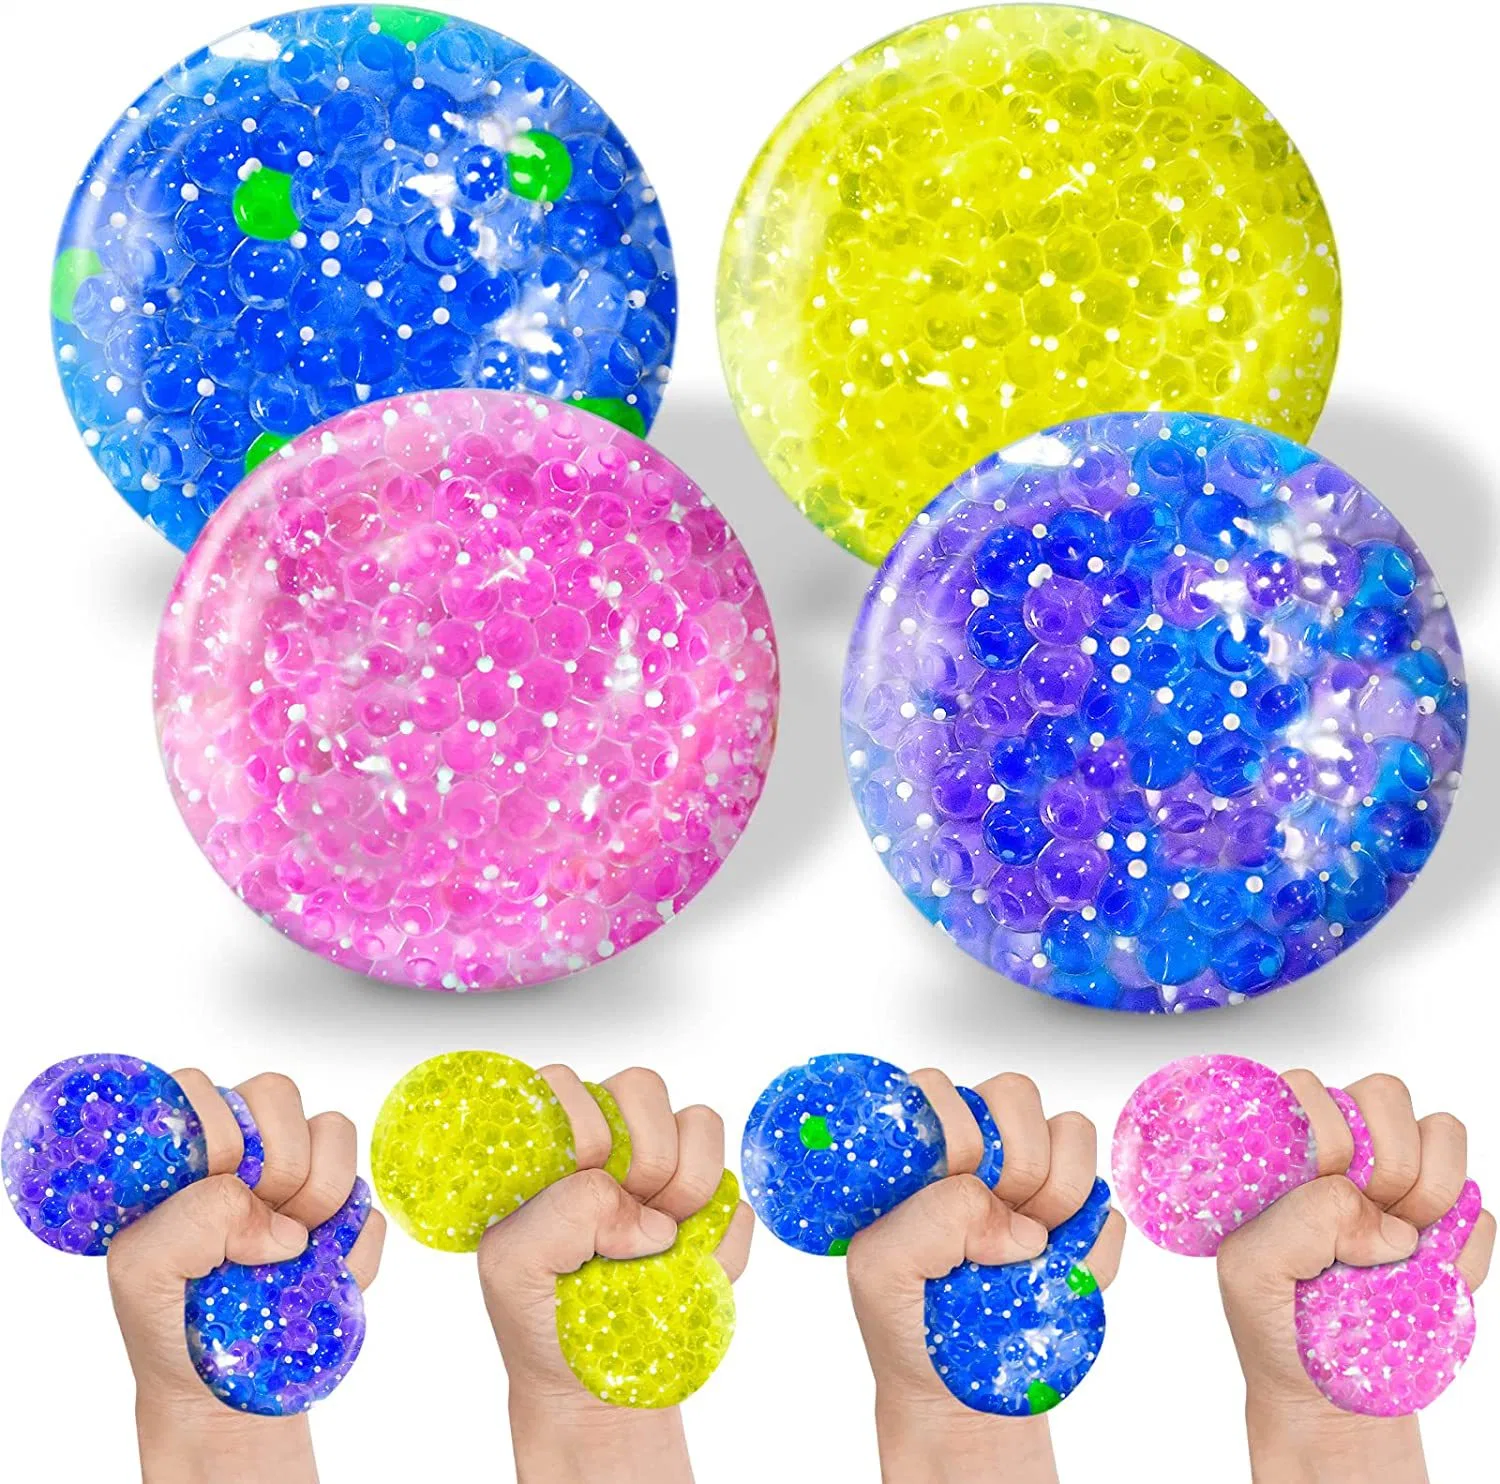 Wholesale Promotional Finger Hand Squeeze Ball Splat Ball Fidget Toy Mesh Squeeze Ball for Kids Gifts